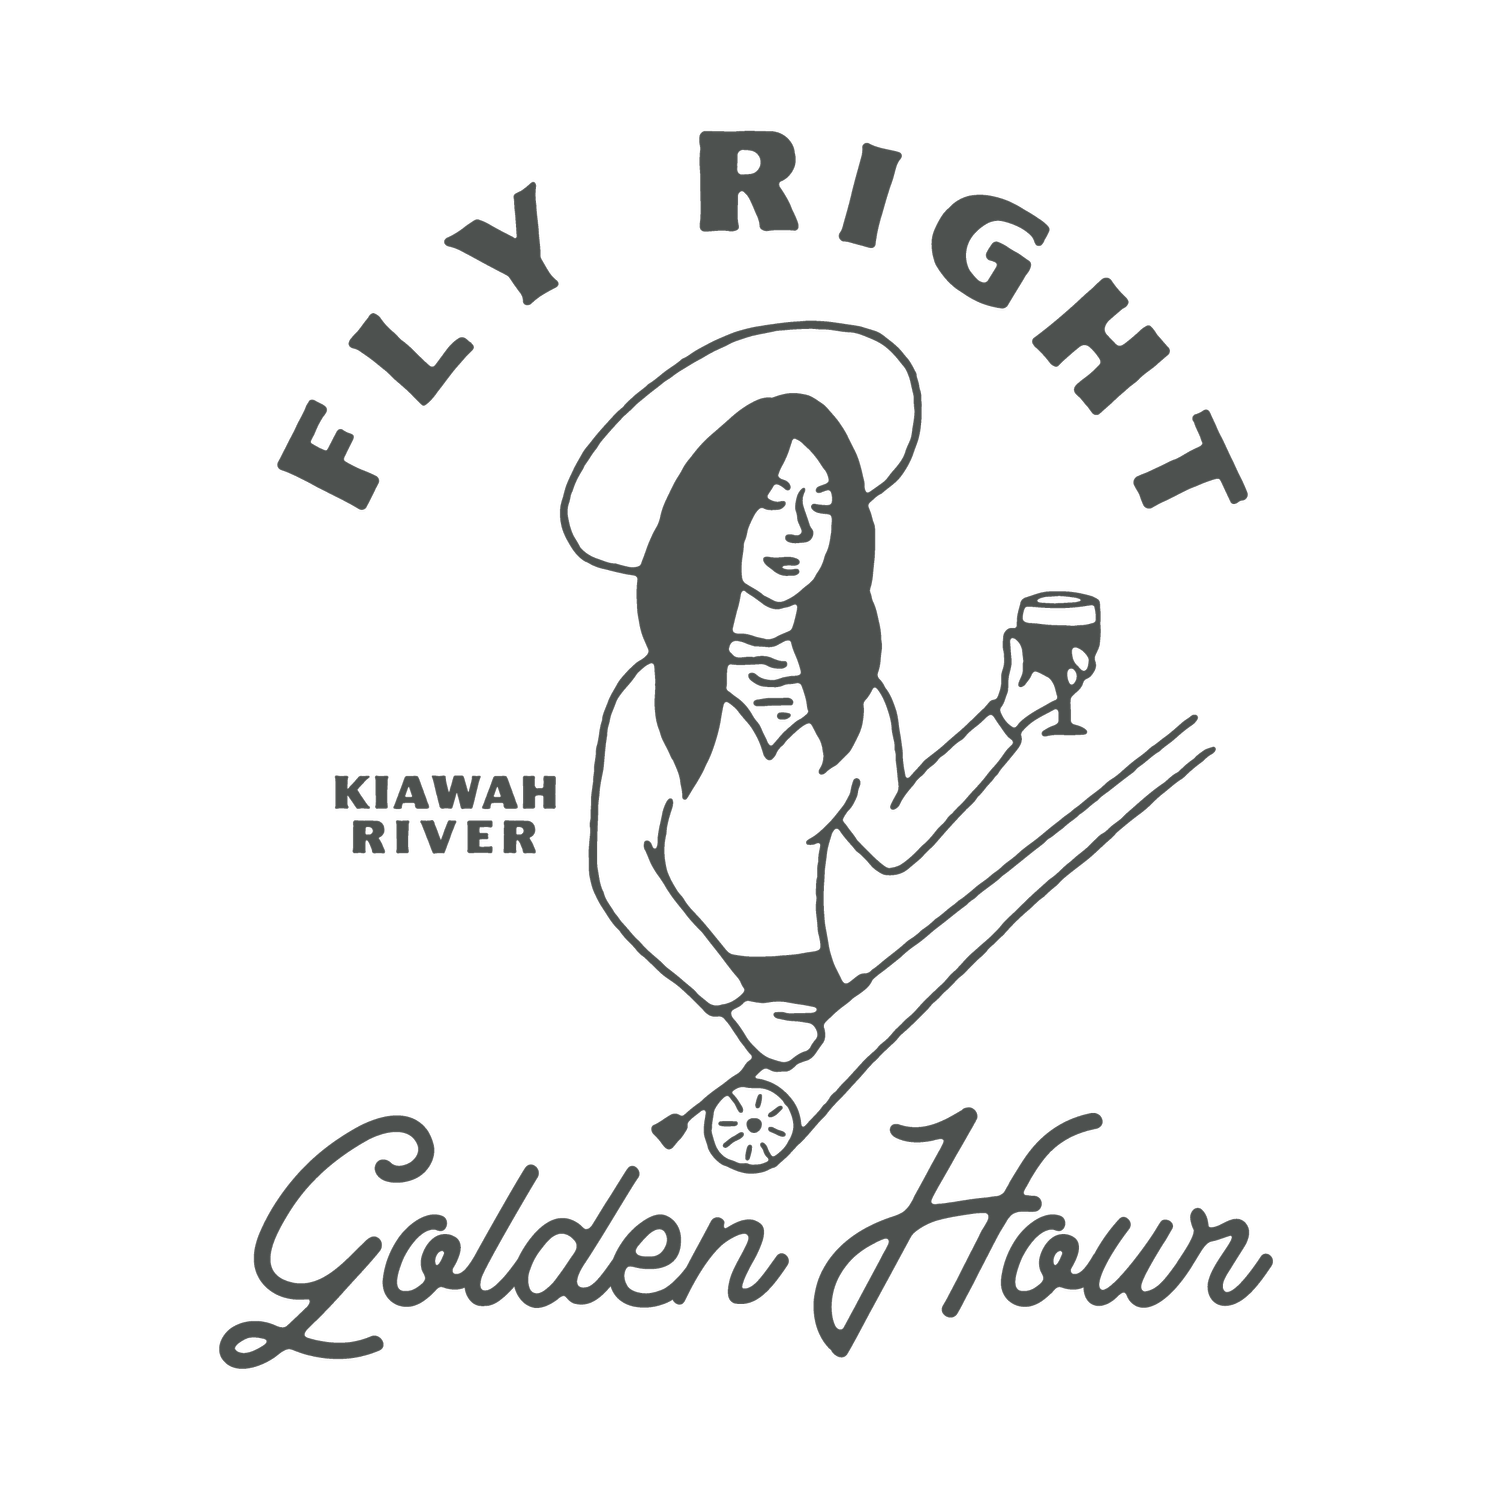 FLY RIGHT X GOLDEN HOUR